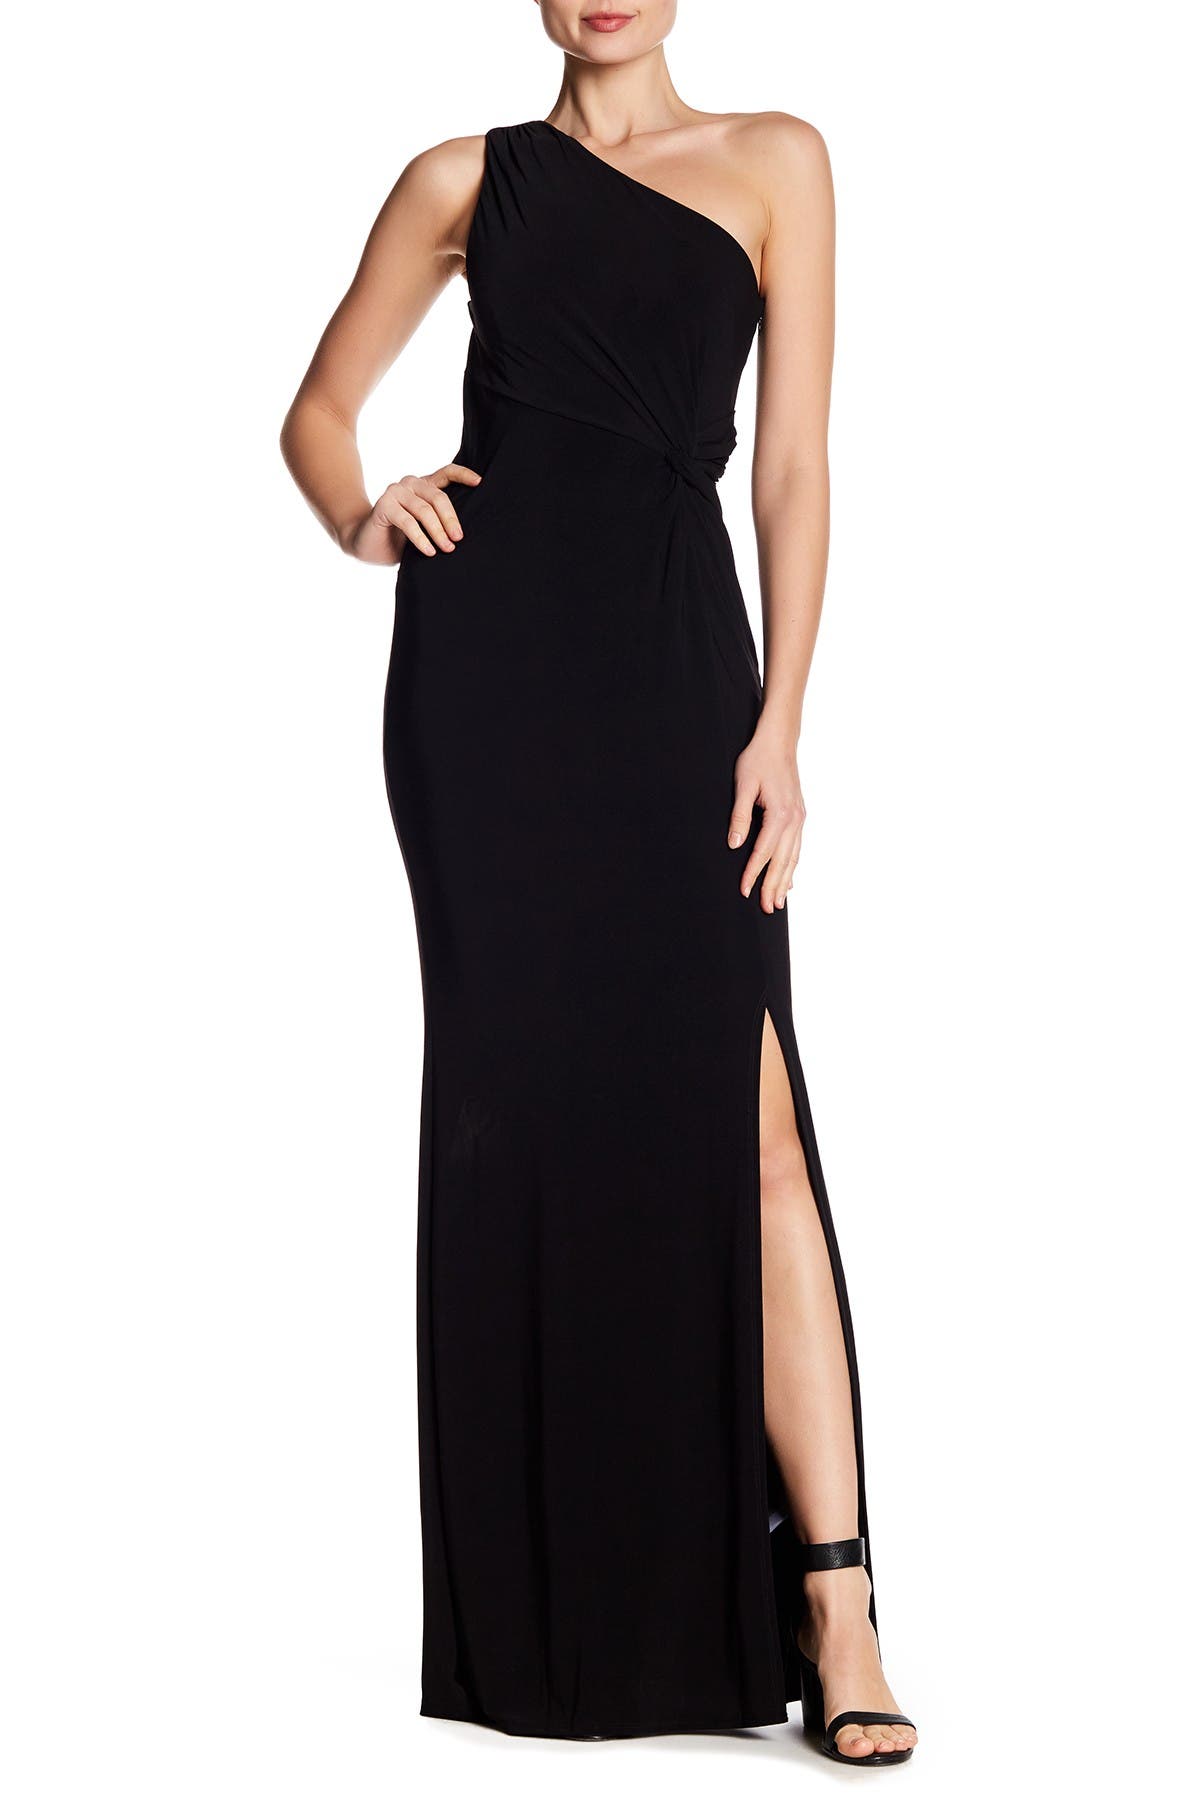 Laundry By Shelli Segal | One Shoulder 